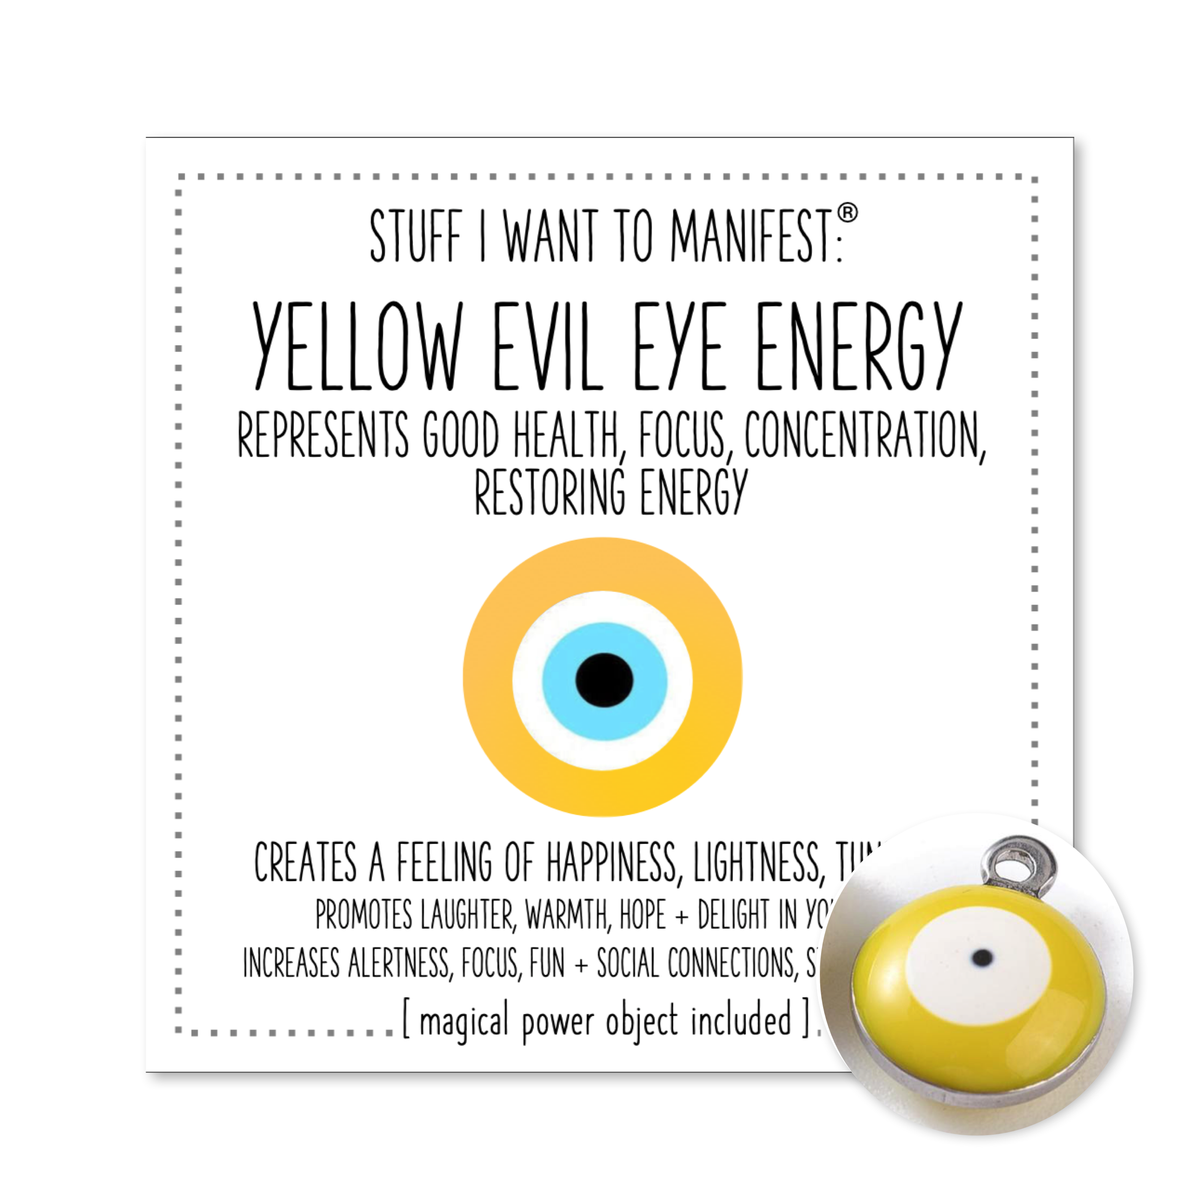 Stuff I Want To Manifest : The Energy of the YELLOW Evil Eye